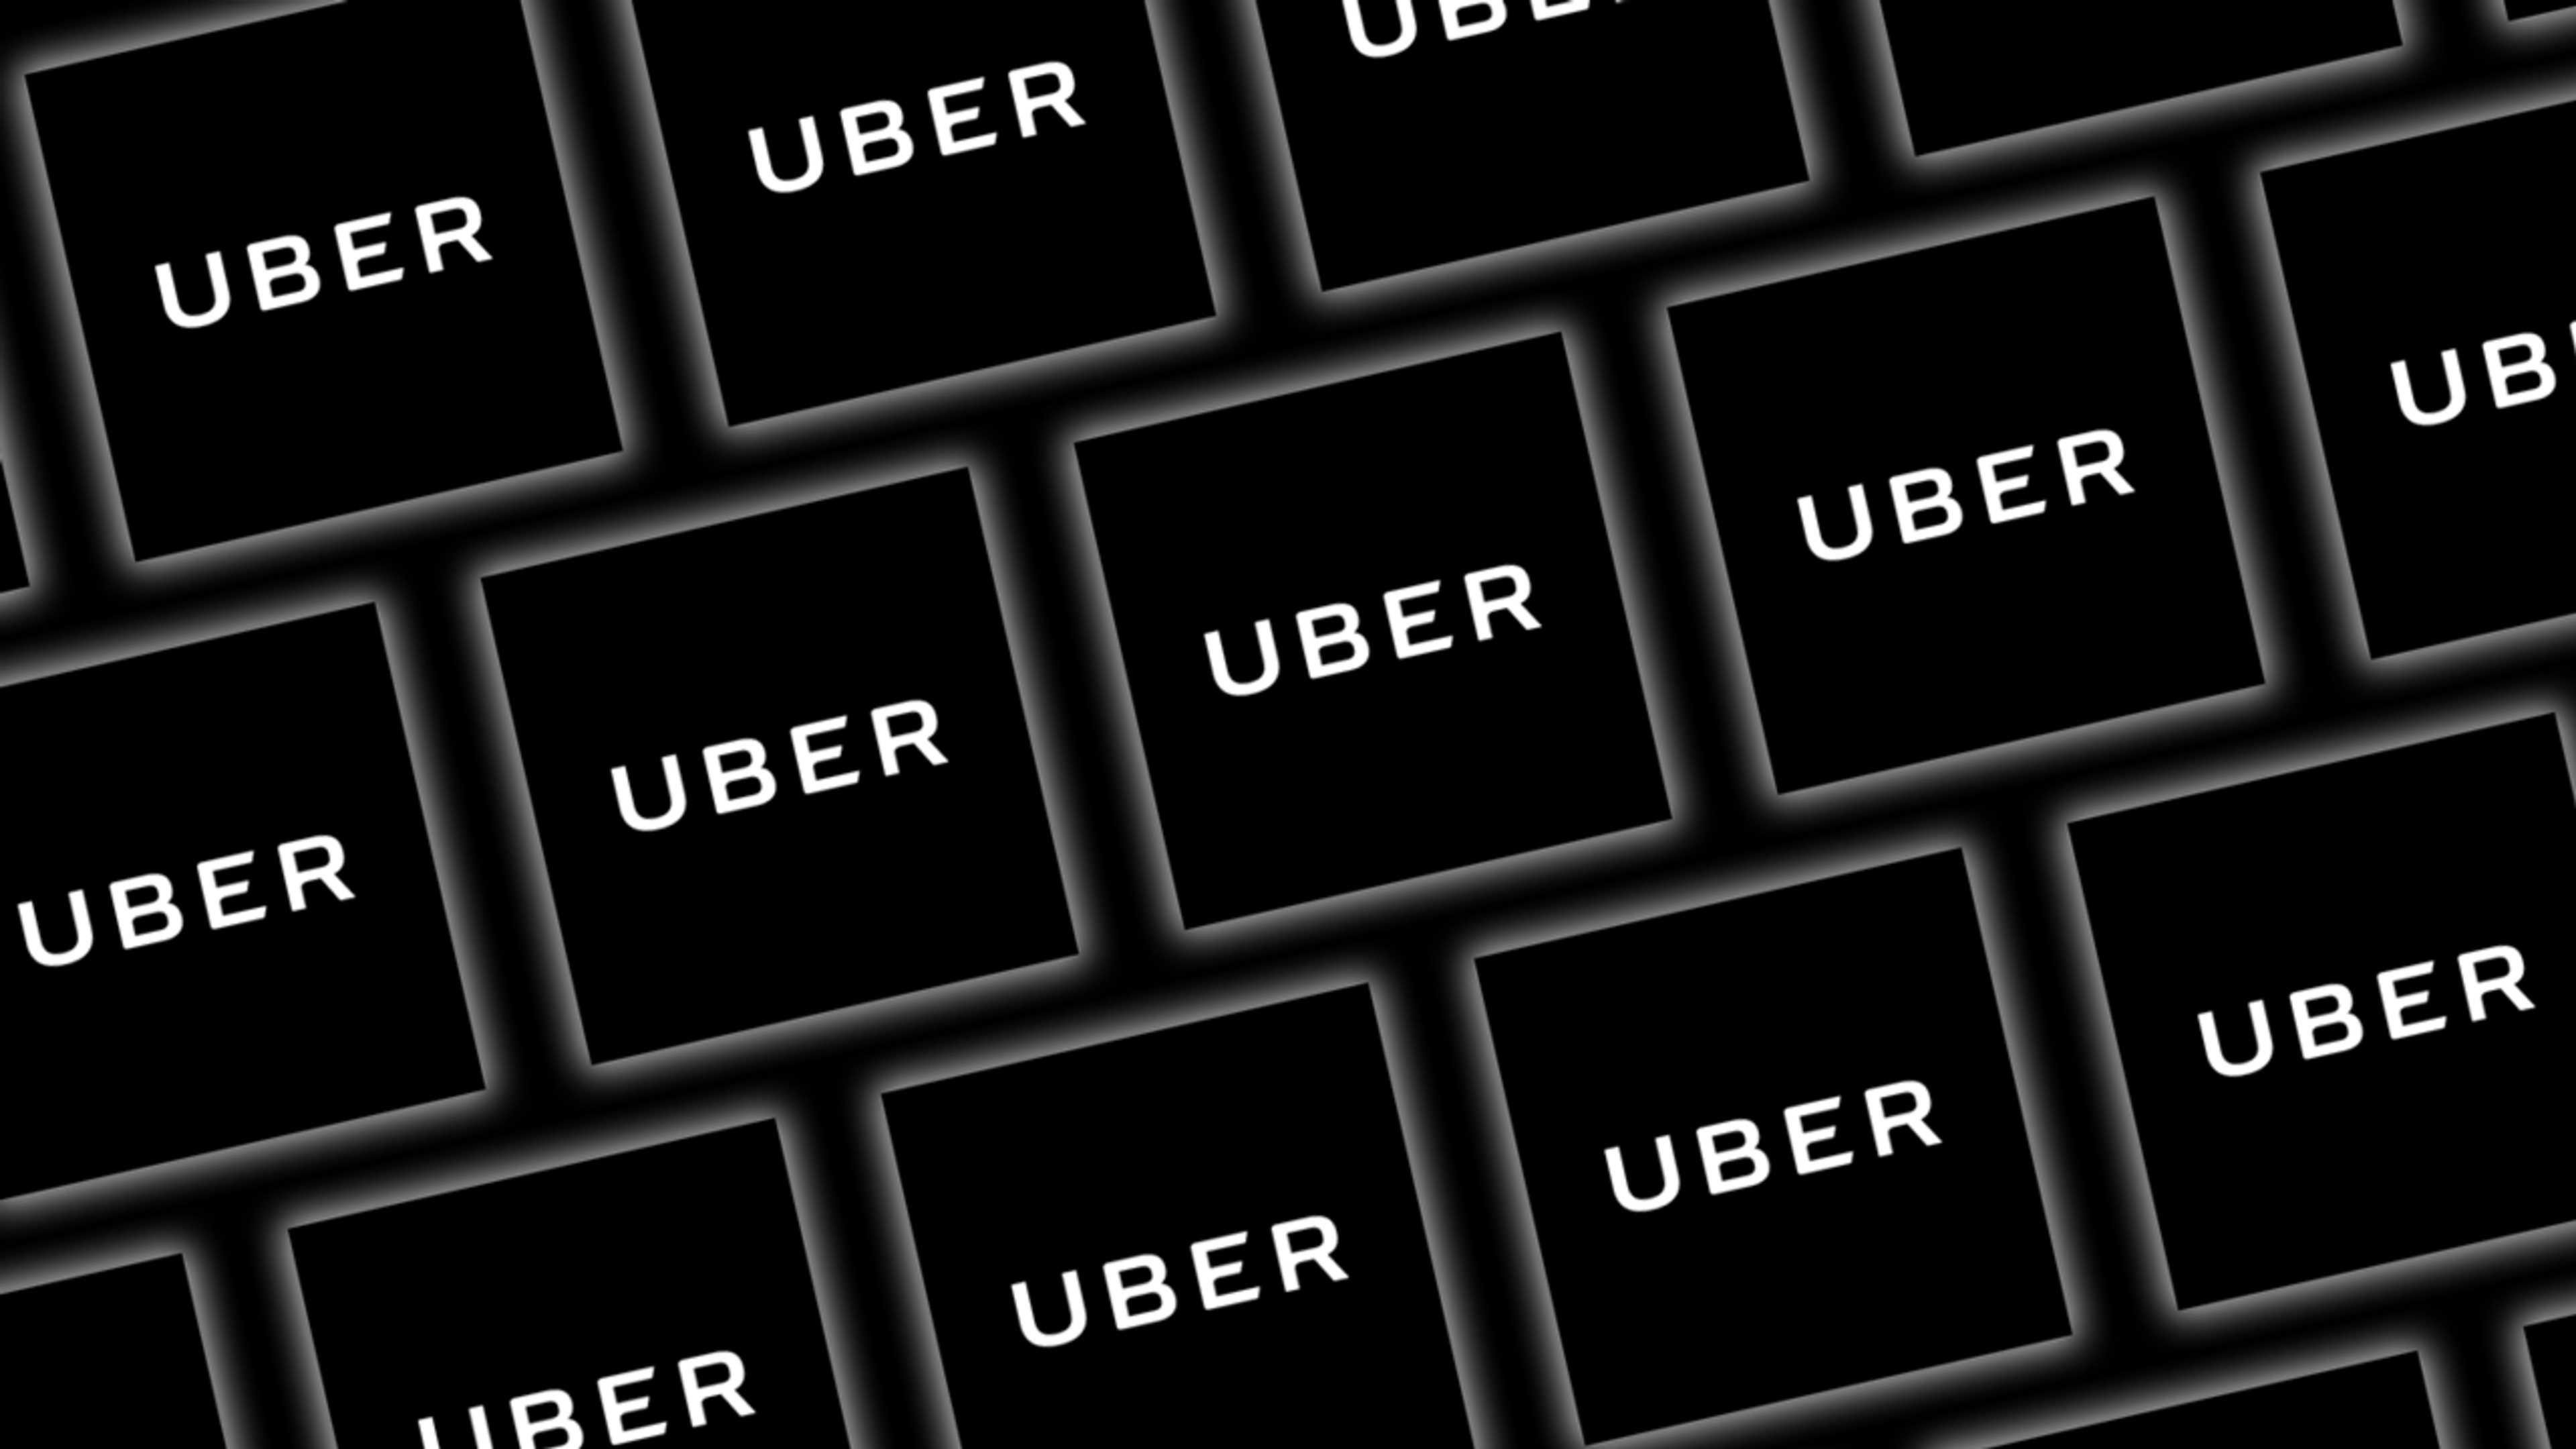 Uber’s head of human resources has resigned amid racial discrimination allegations